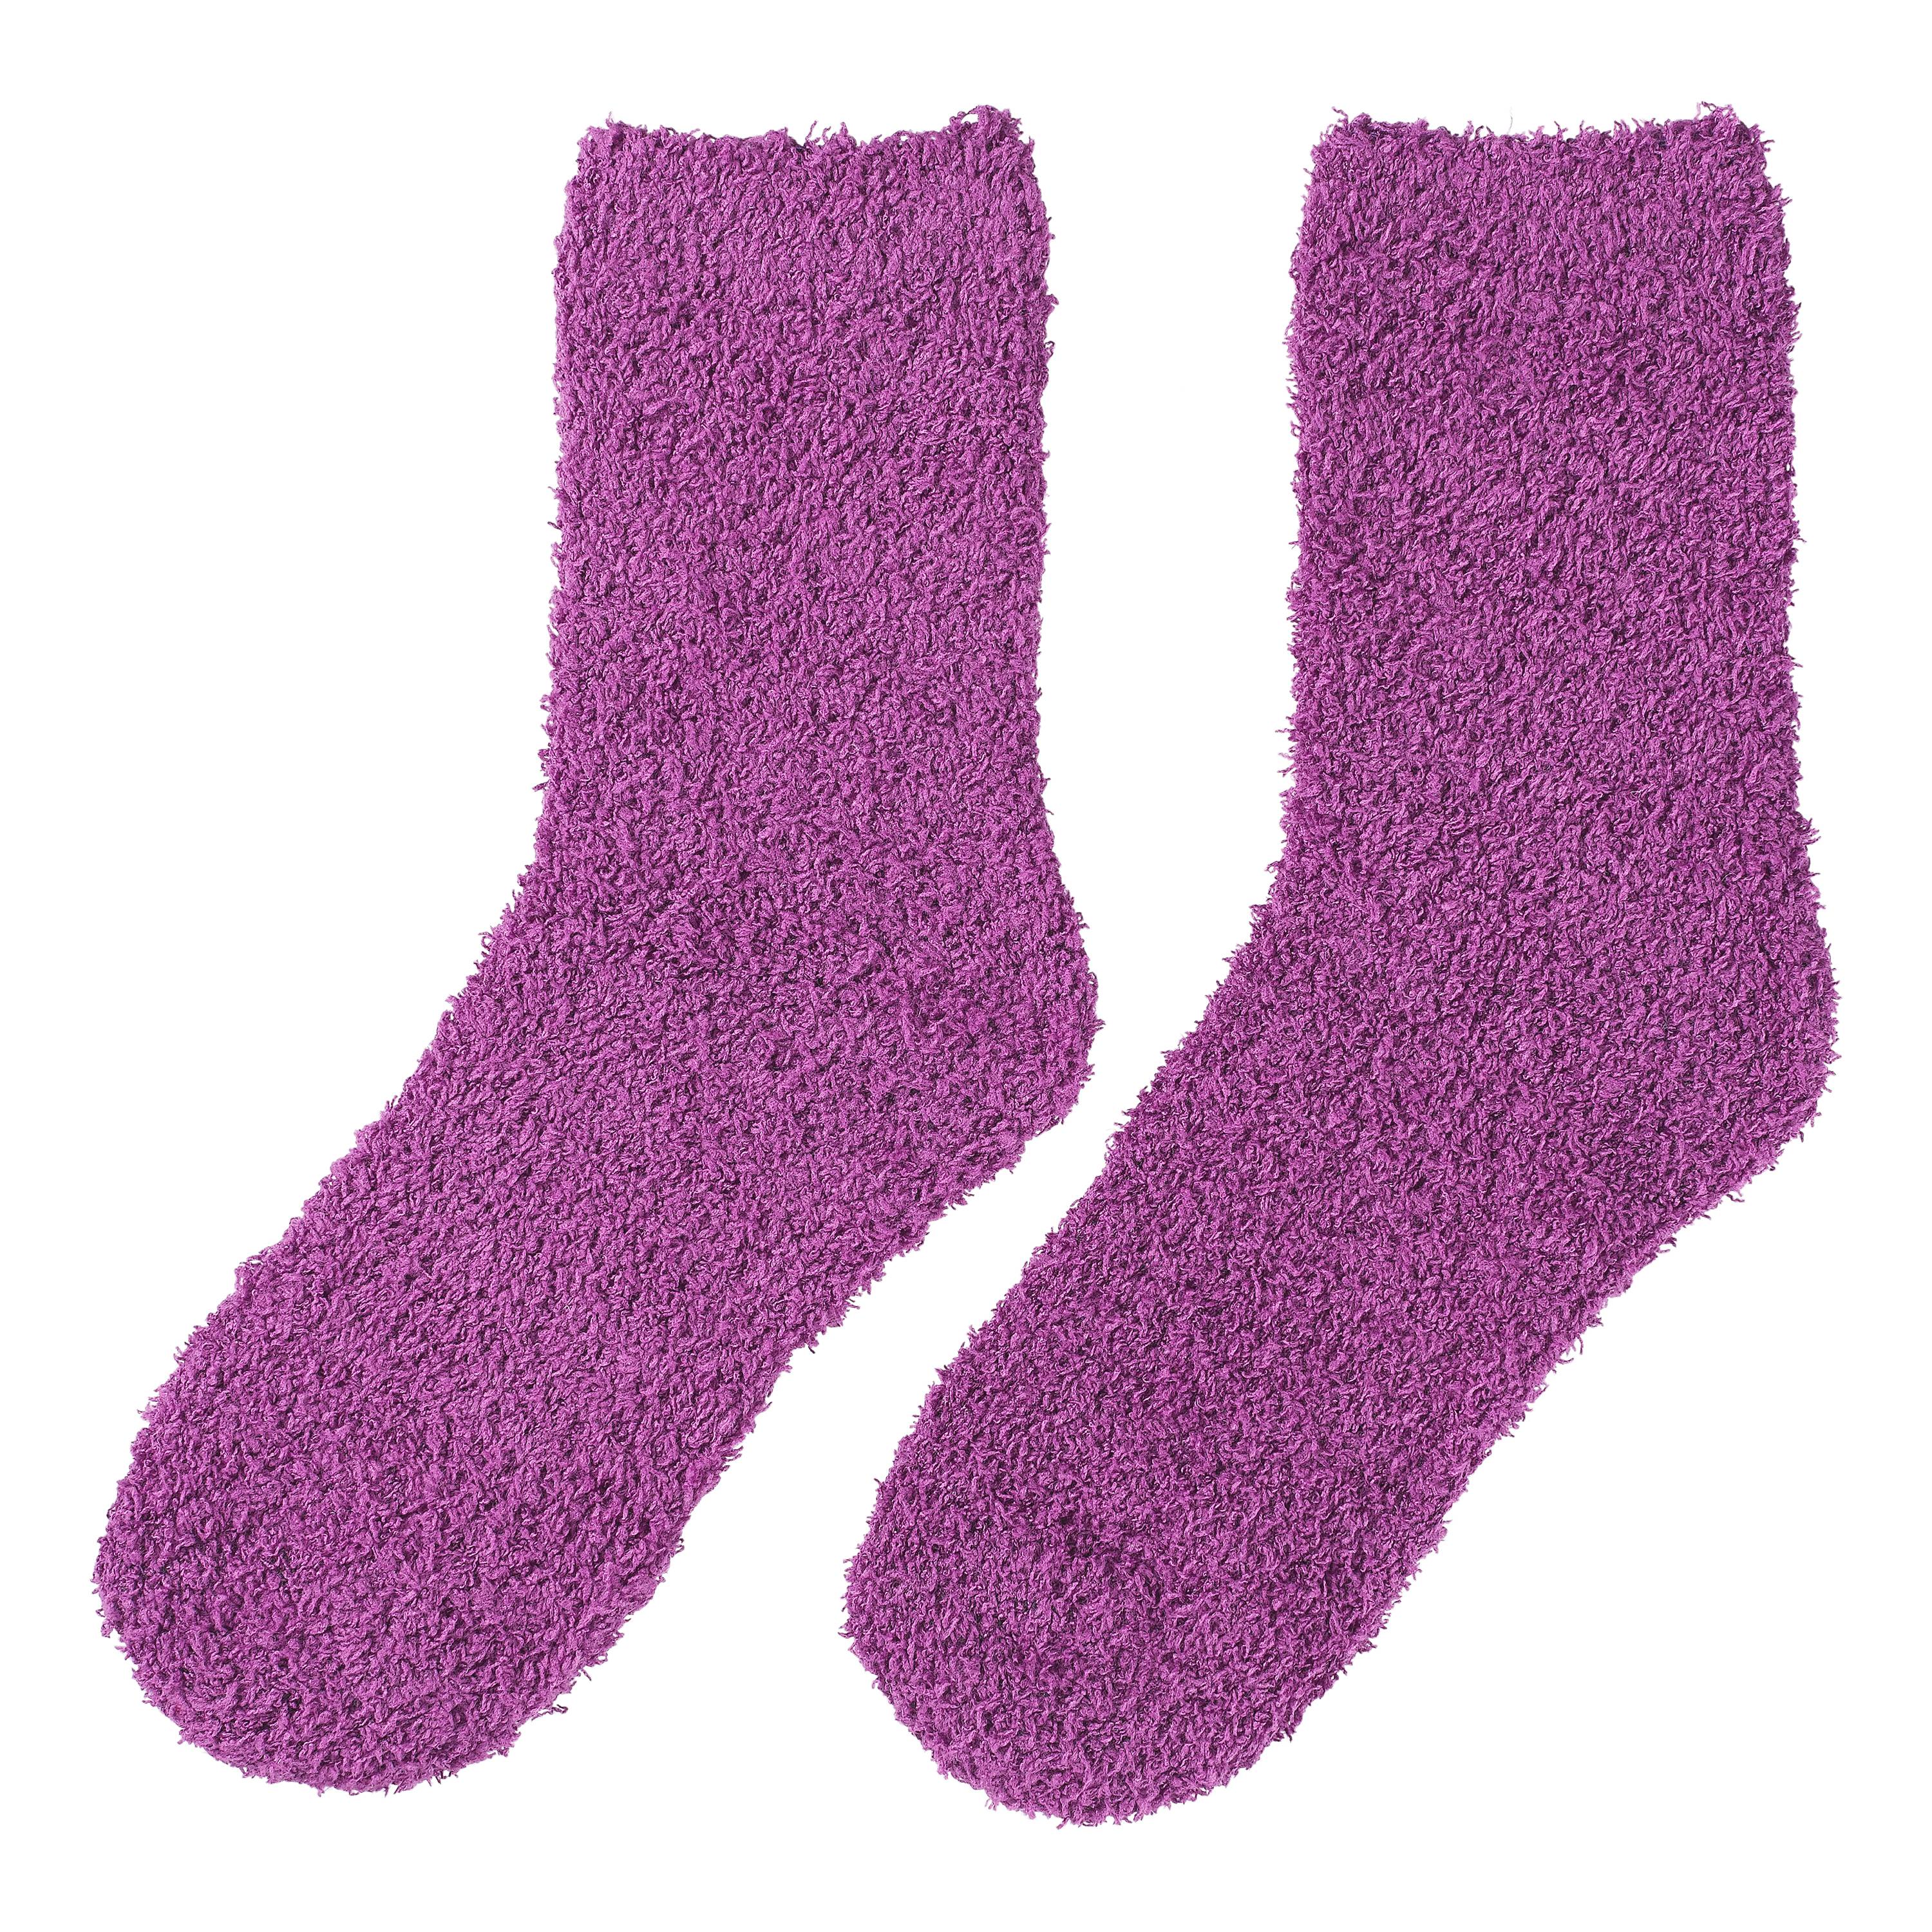 Bodycology 3-Piece Dark Cherry Orchid Fragrance Gift Set with Warm Socks - image 3 of 4